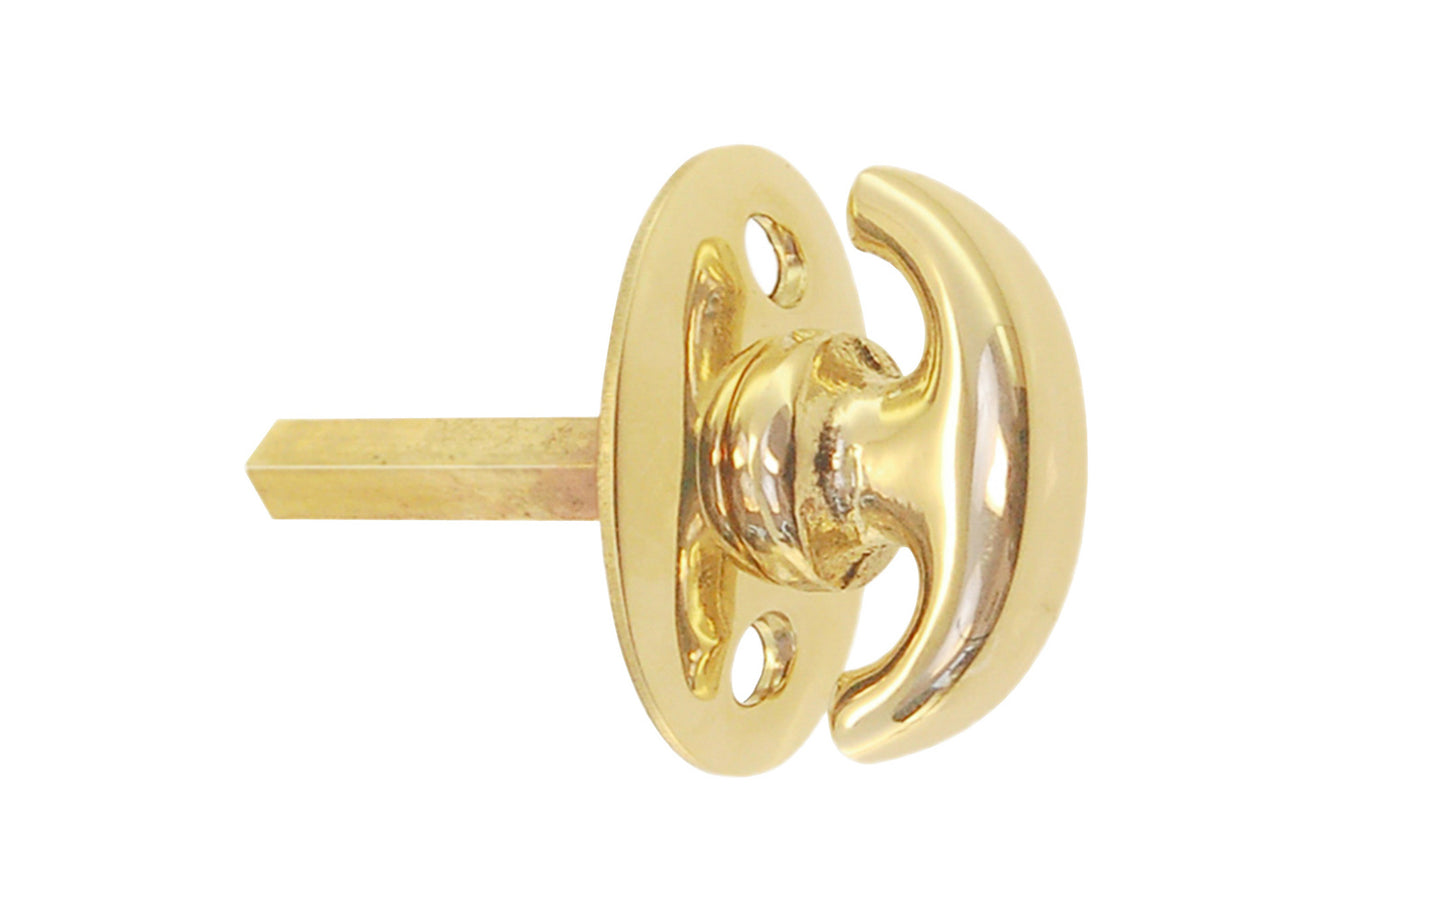 An old-style Classic Solid Brass crescent thumbturn for locking doors with a smaller oval plate. Used with mortise locks, deadbolts, night-locks, catches. Made of solid brass material. 3/16" thick shaft. Lacquered brass finish.